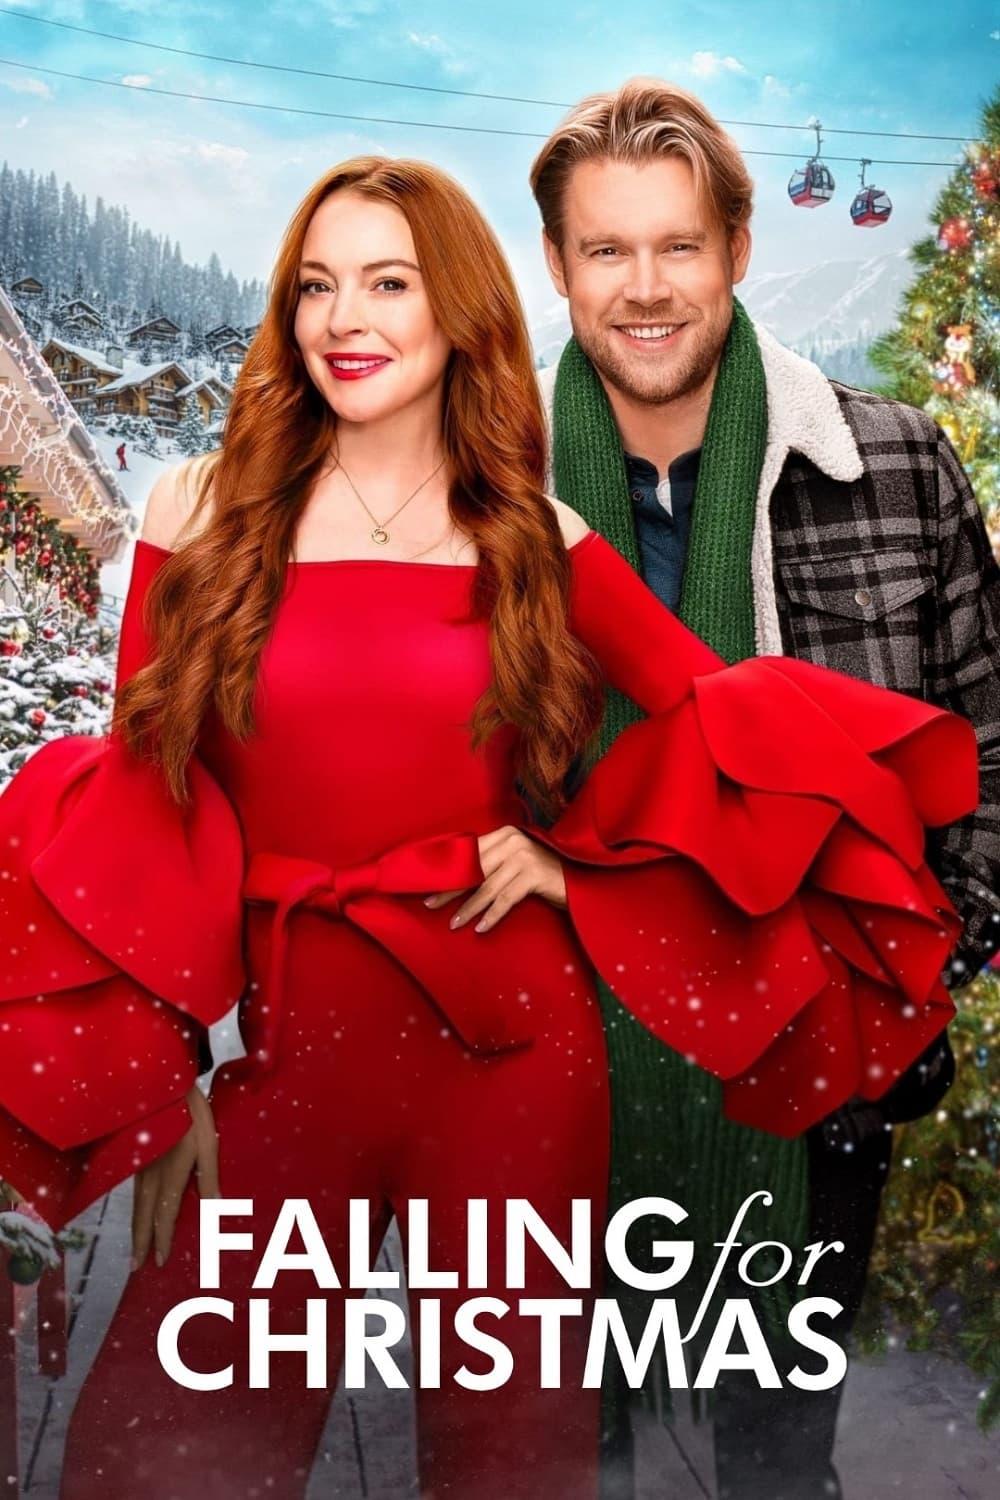 Falling for Christmas poster